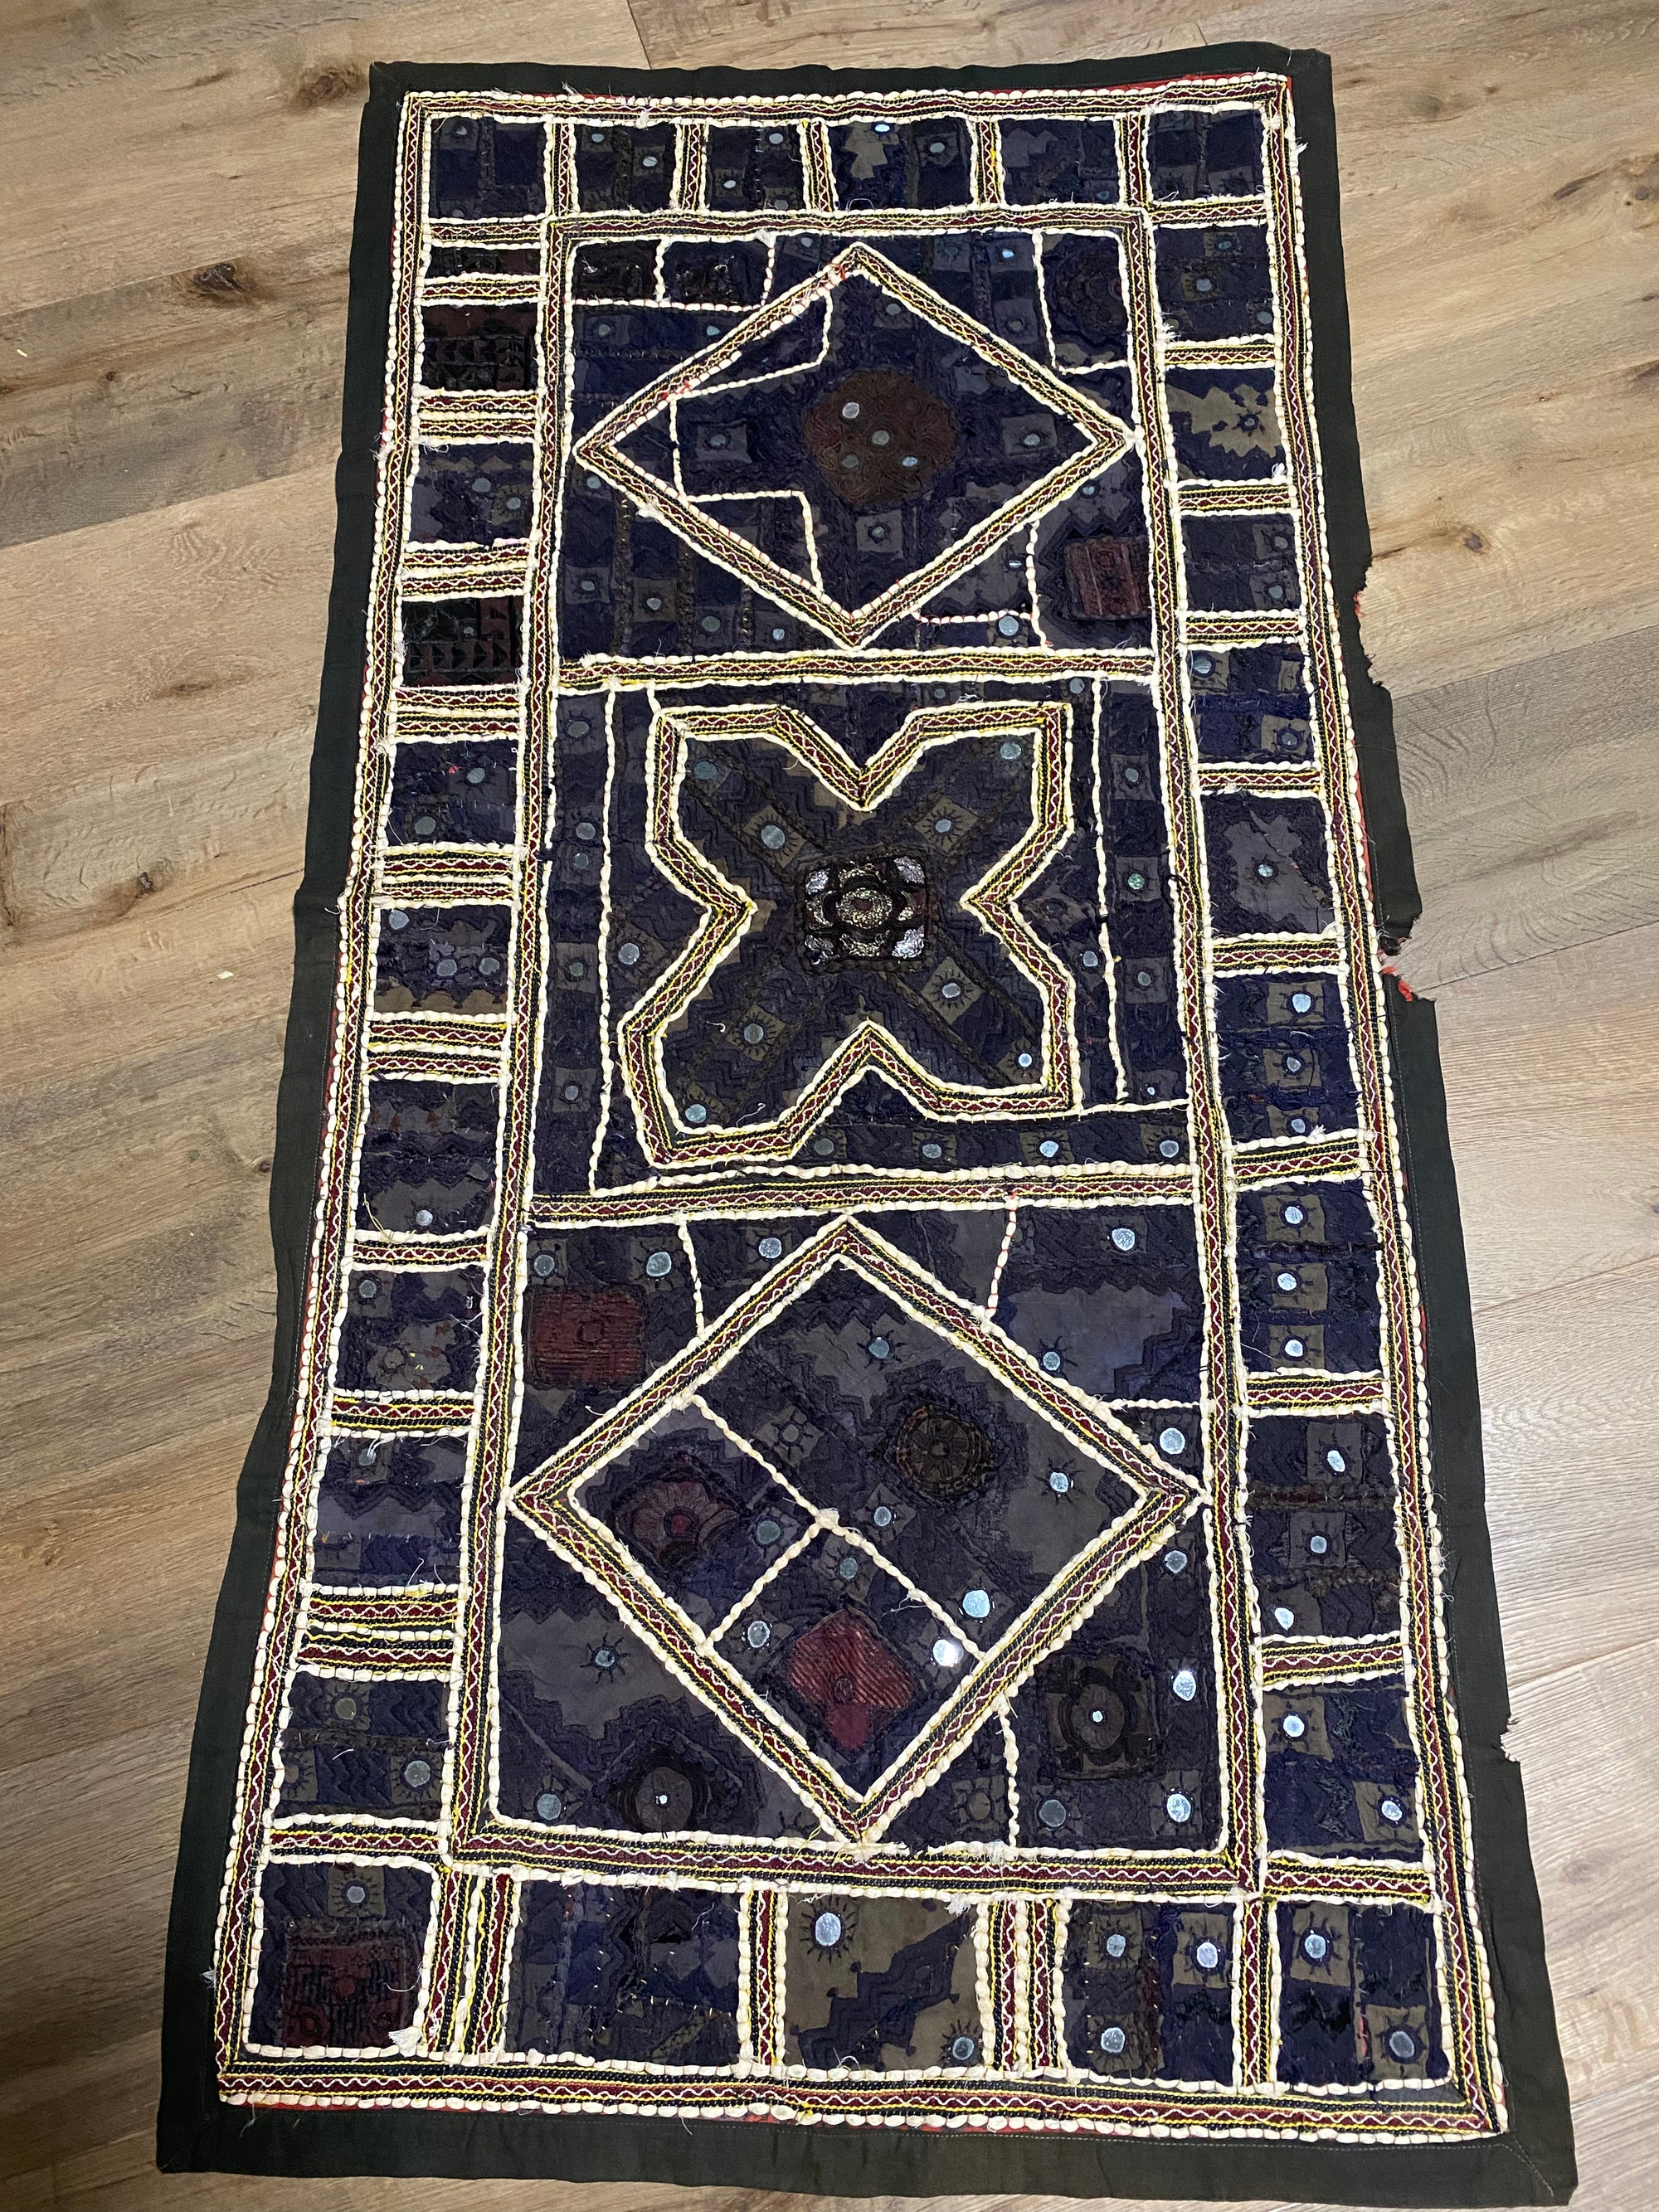 Authentic vintage Rabari textile featuring mirror-work, hand embroidery, applique and silver metal thread zari work. Mid 20th Century, from the Sind Desert region of Rajasthan. The textile is in excellent condition apart from some nibbles to the side of the textile. Measurements: 136 x 170 cm